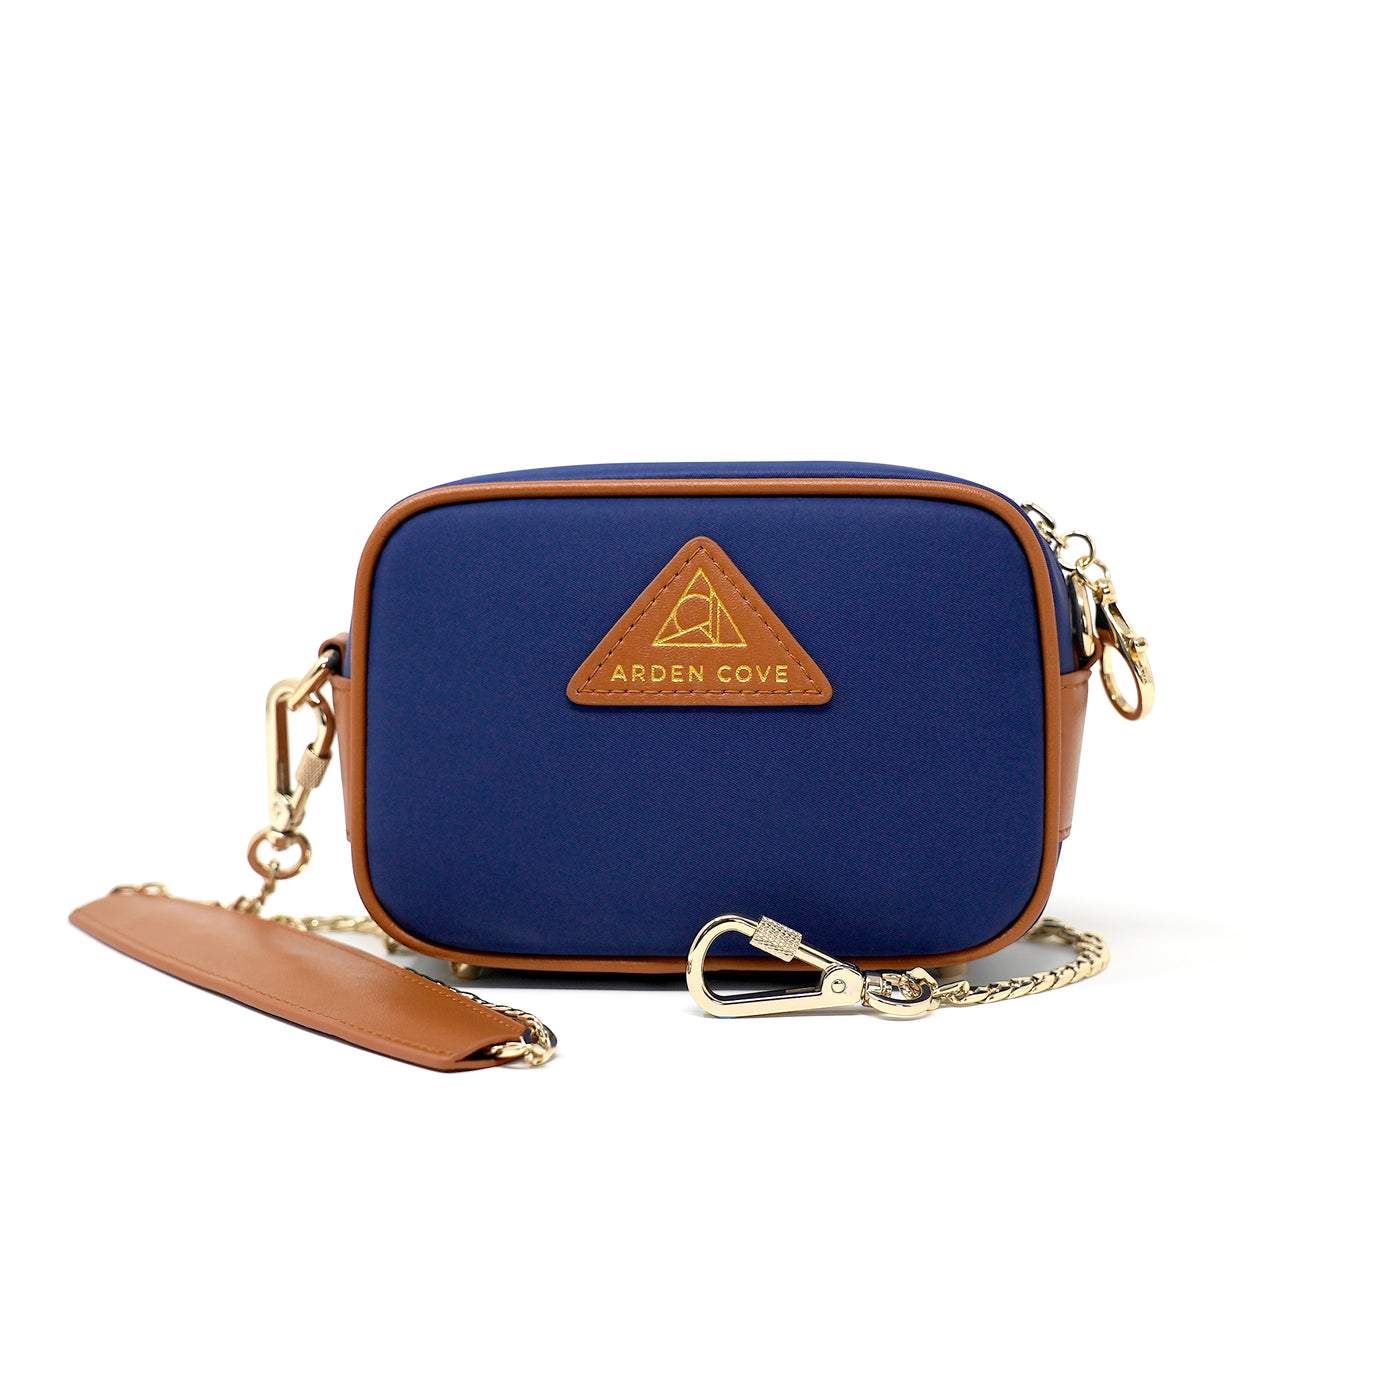 Anti-theft Water-resistant Travel Crossbody - Crissy Mini Crossbody in Navy Gold with slash-resistant chain & locking clasps straps - front view - Arden Cove